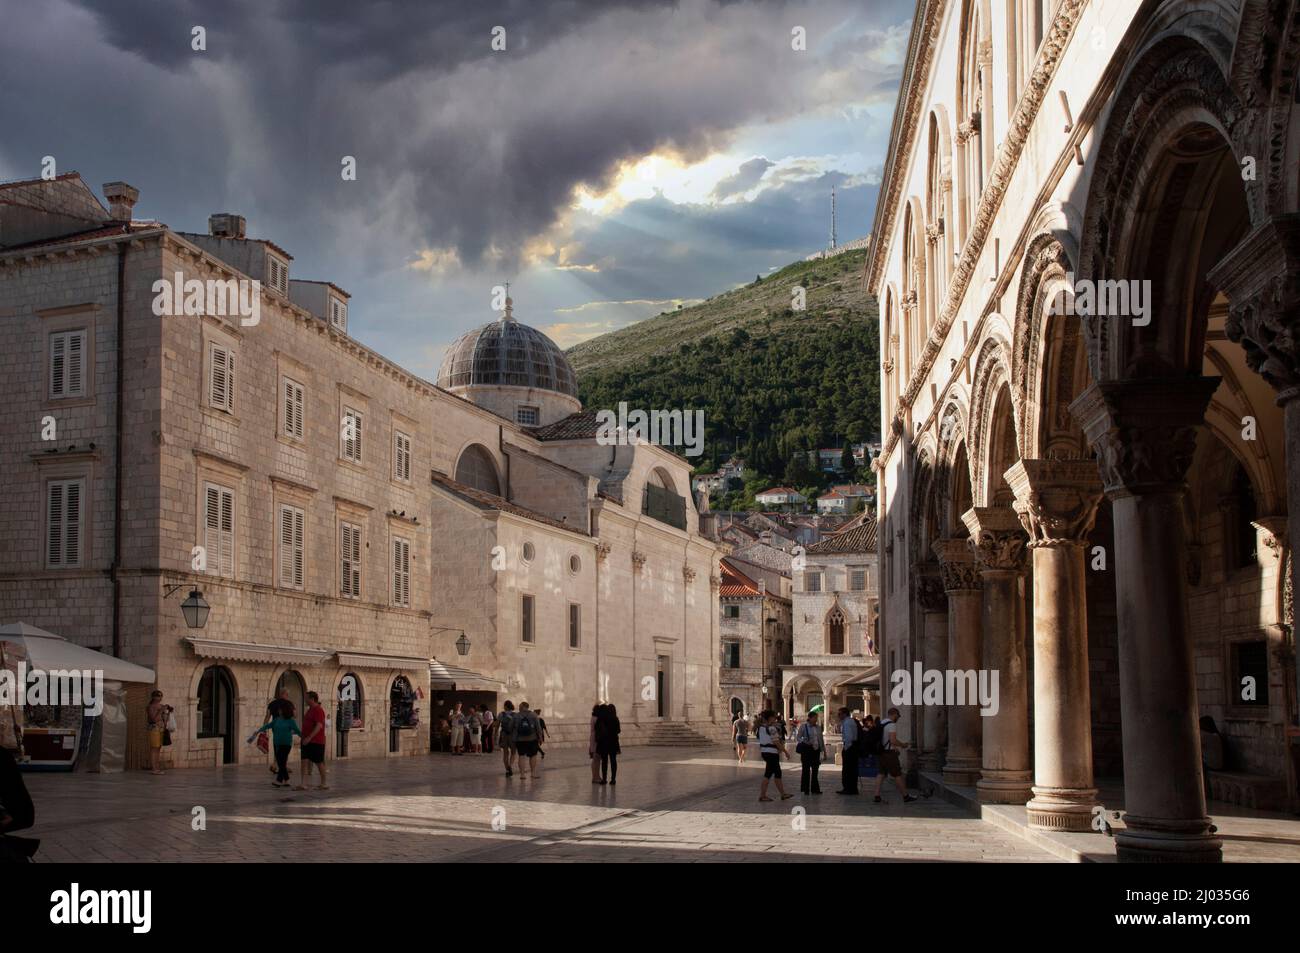 The Dubrovnik Old Town during cloudy day, Croatia Stock Photo